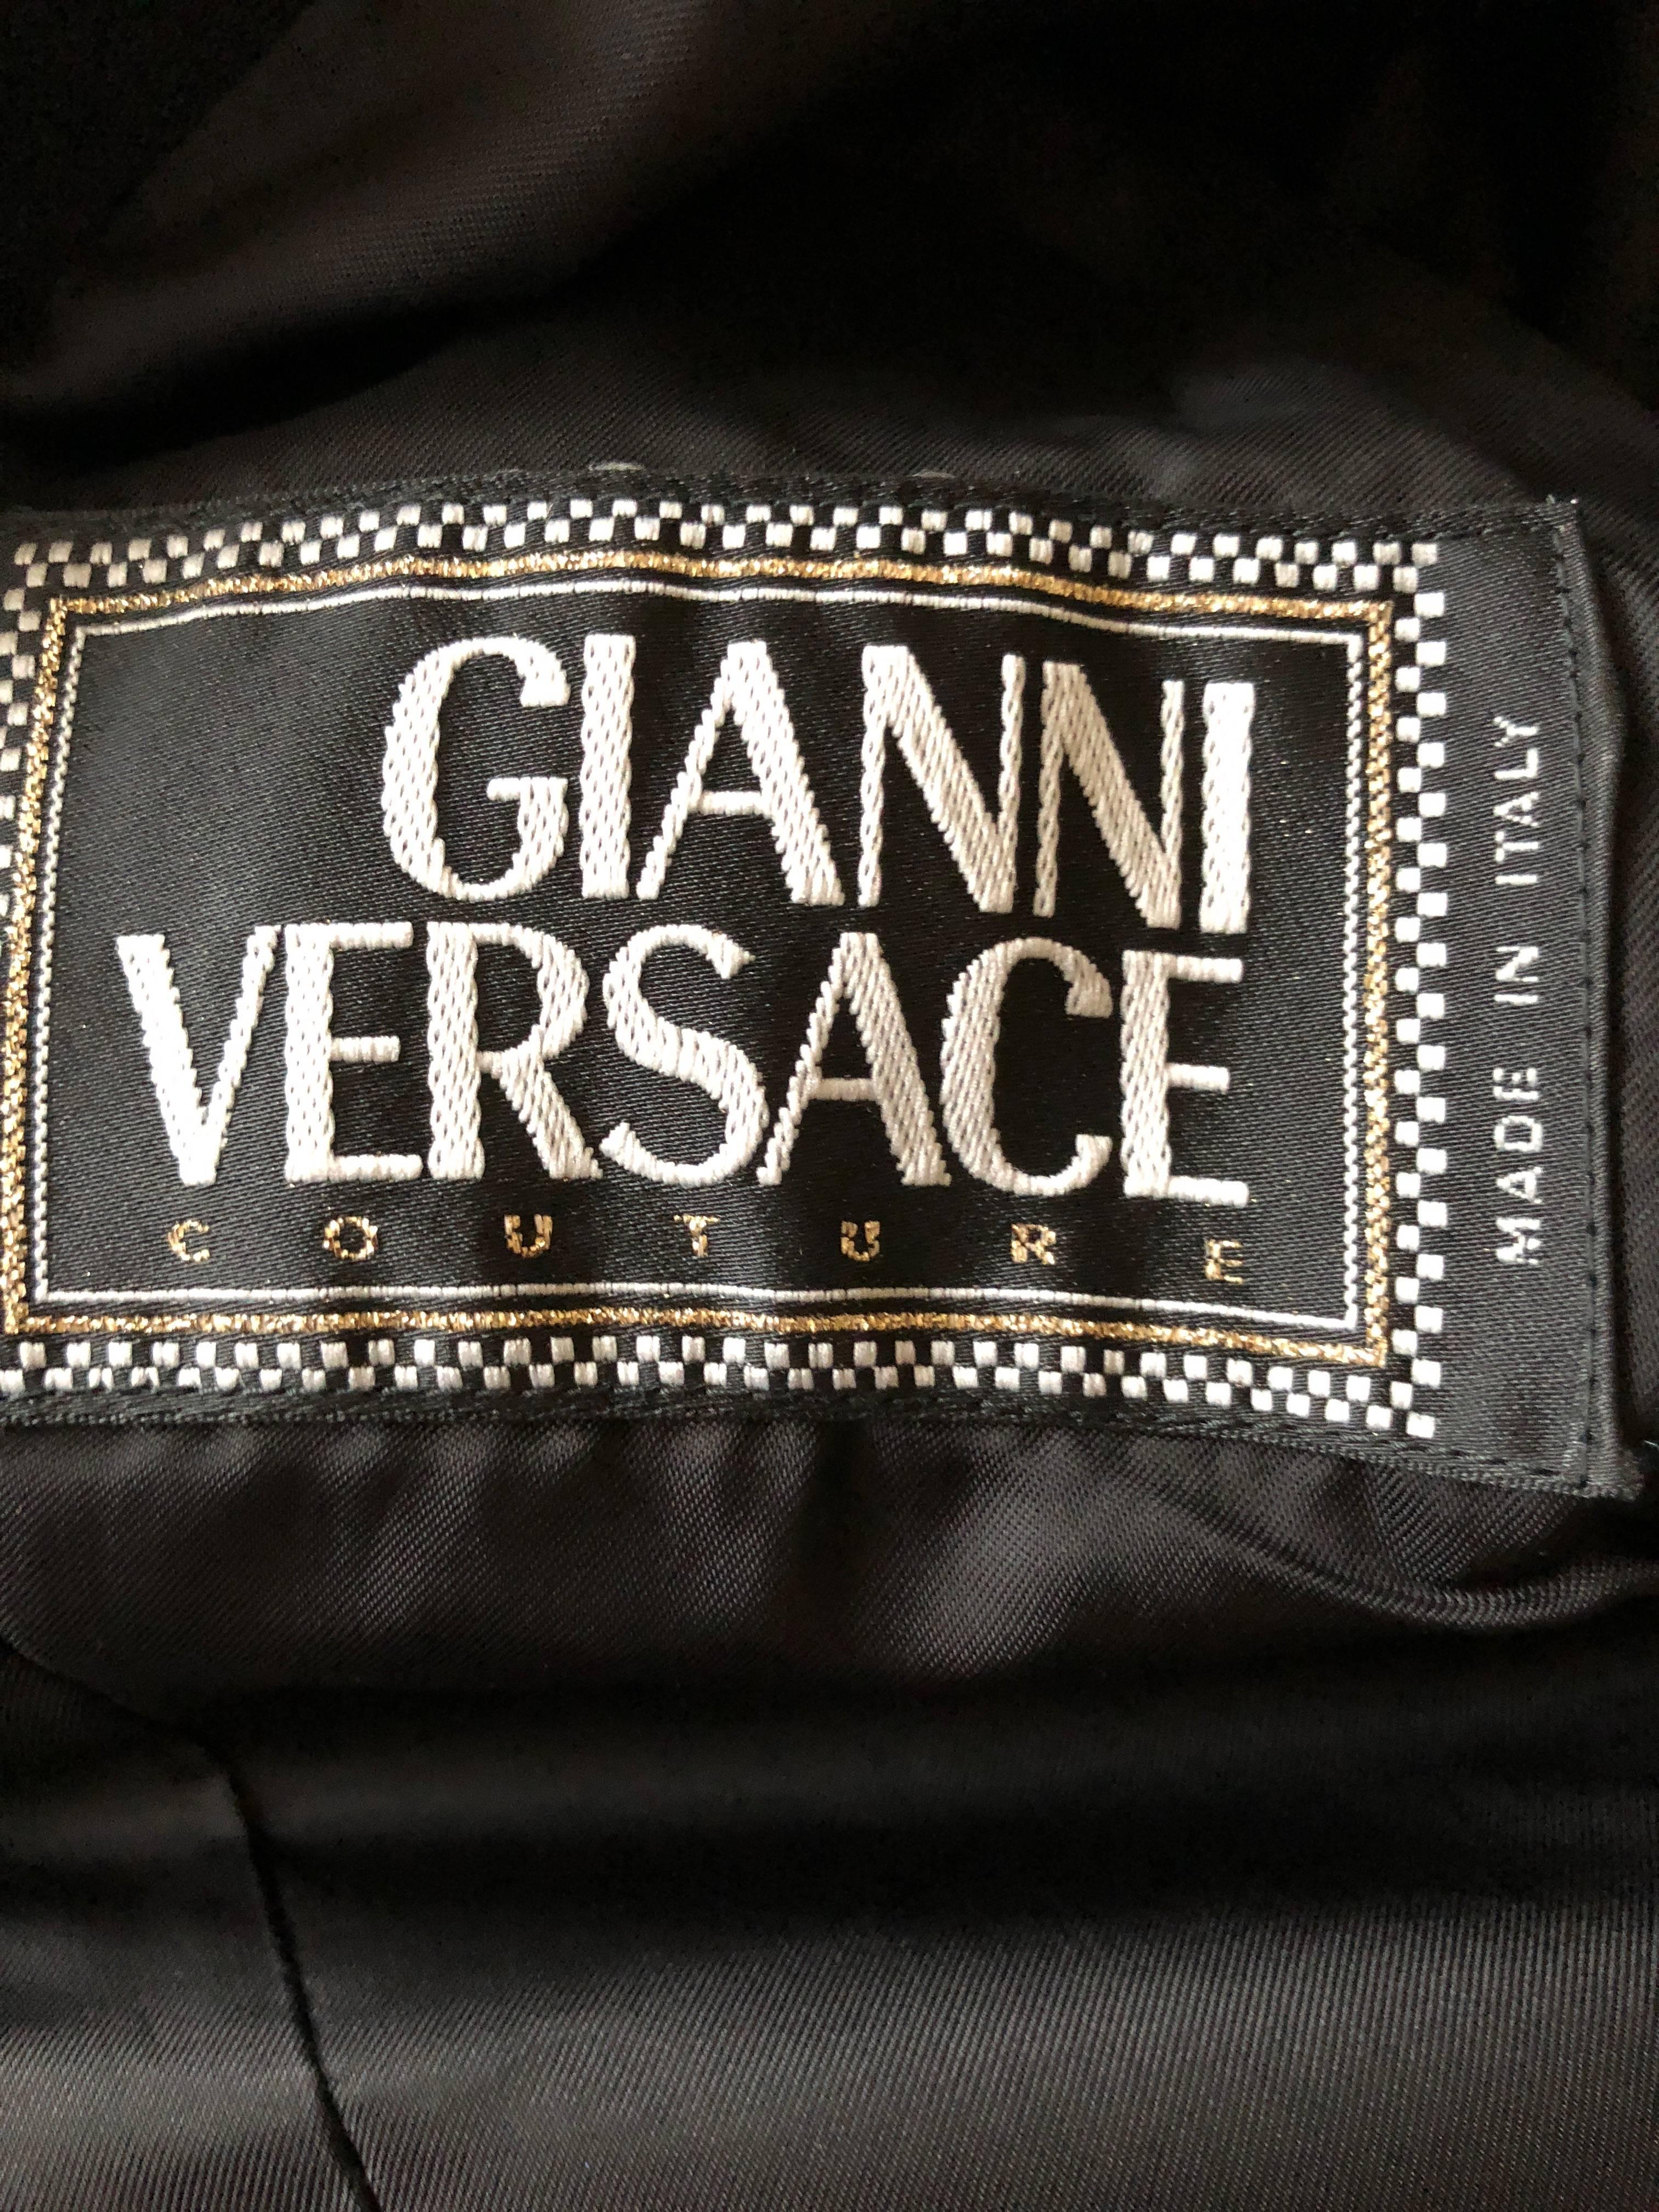 Gianni Versace Couture 1980's Black Knit Jacket with Medusa Buttons 6